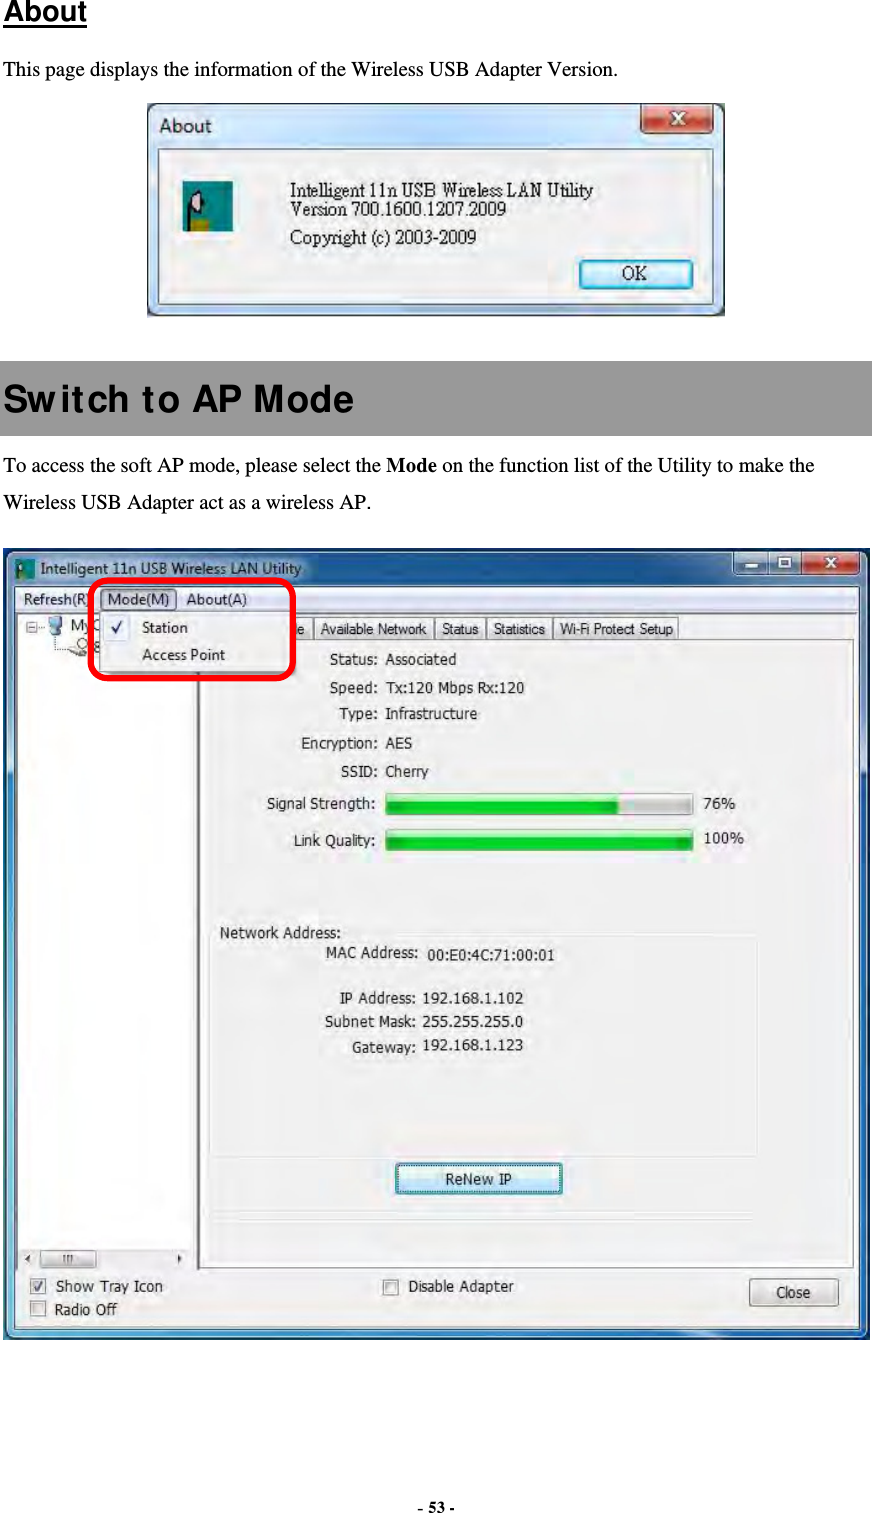  - 53 -  About This page displays the information of the Wireless USB Adapter Version.   Switch to AP Mode To access the soft AP mode, please select the Mode on the function list of the Utility to make the Wireless USB Adapter act as a wireless AP.   